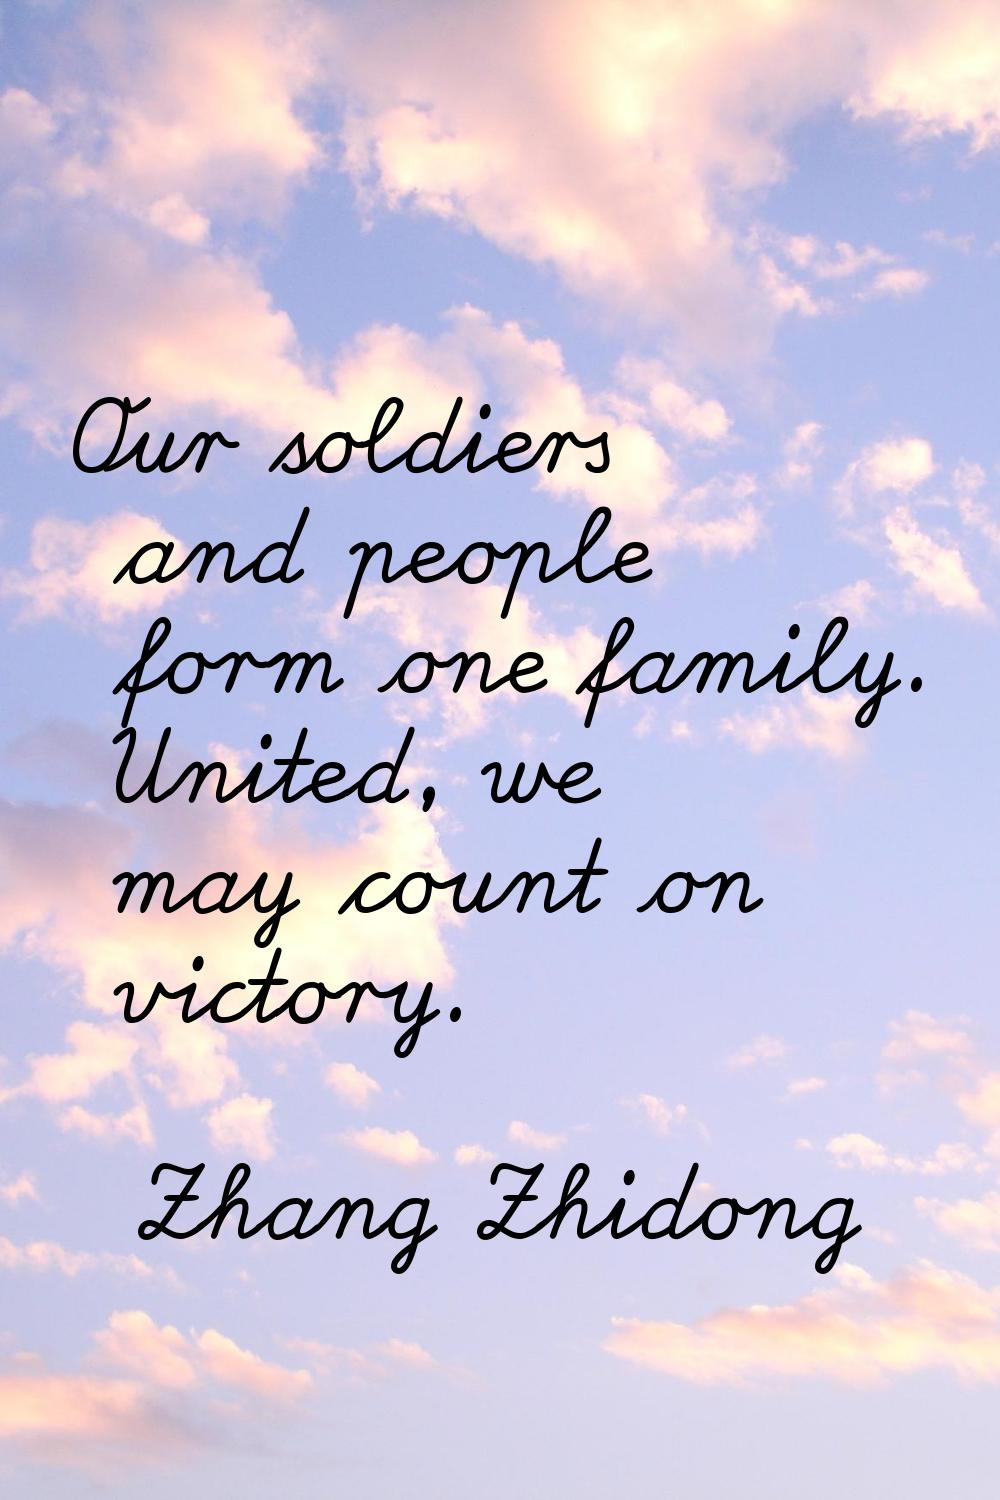 Our soldiers and people form one family. United, we may count on victory.